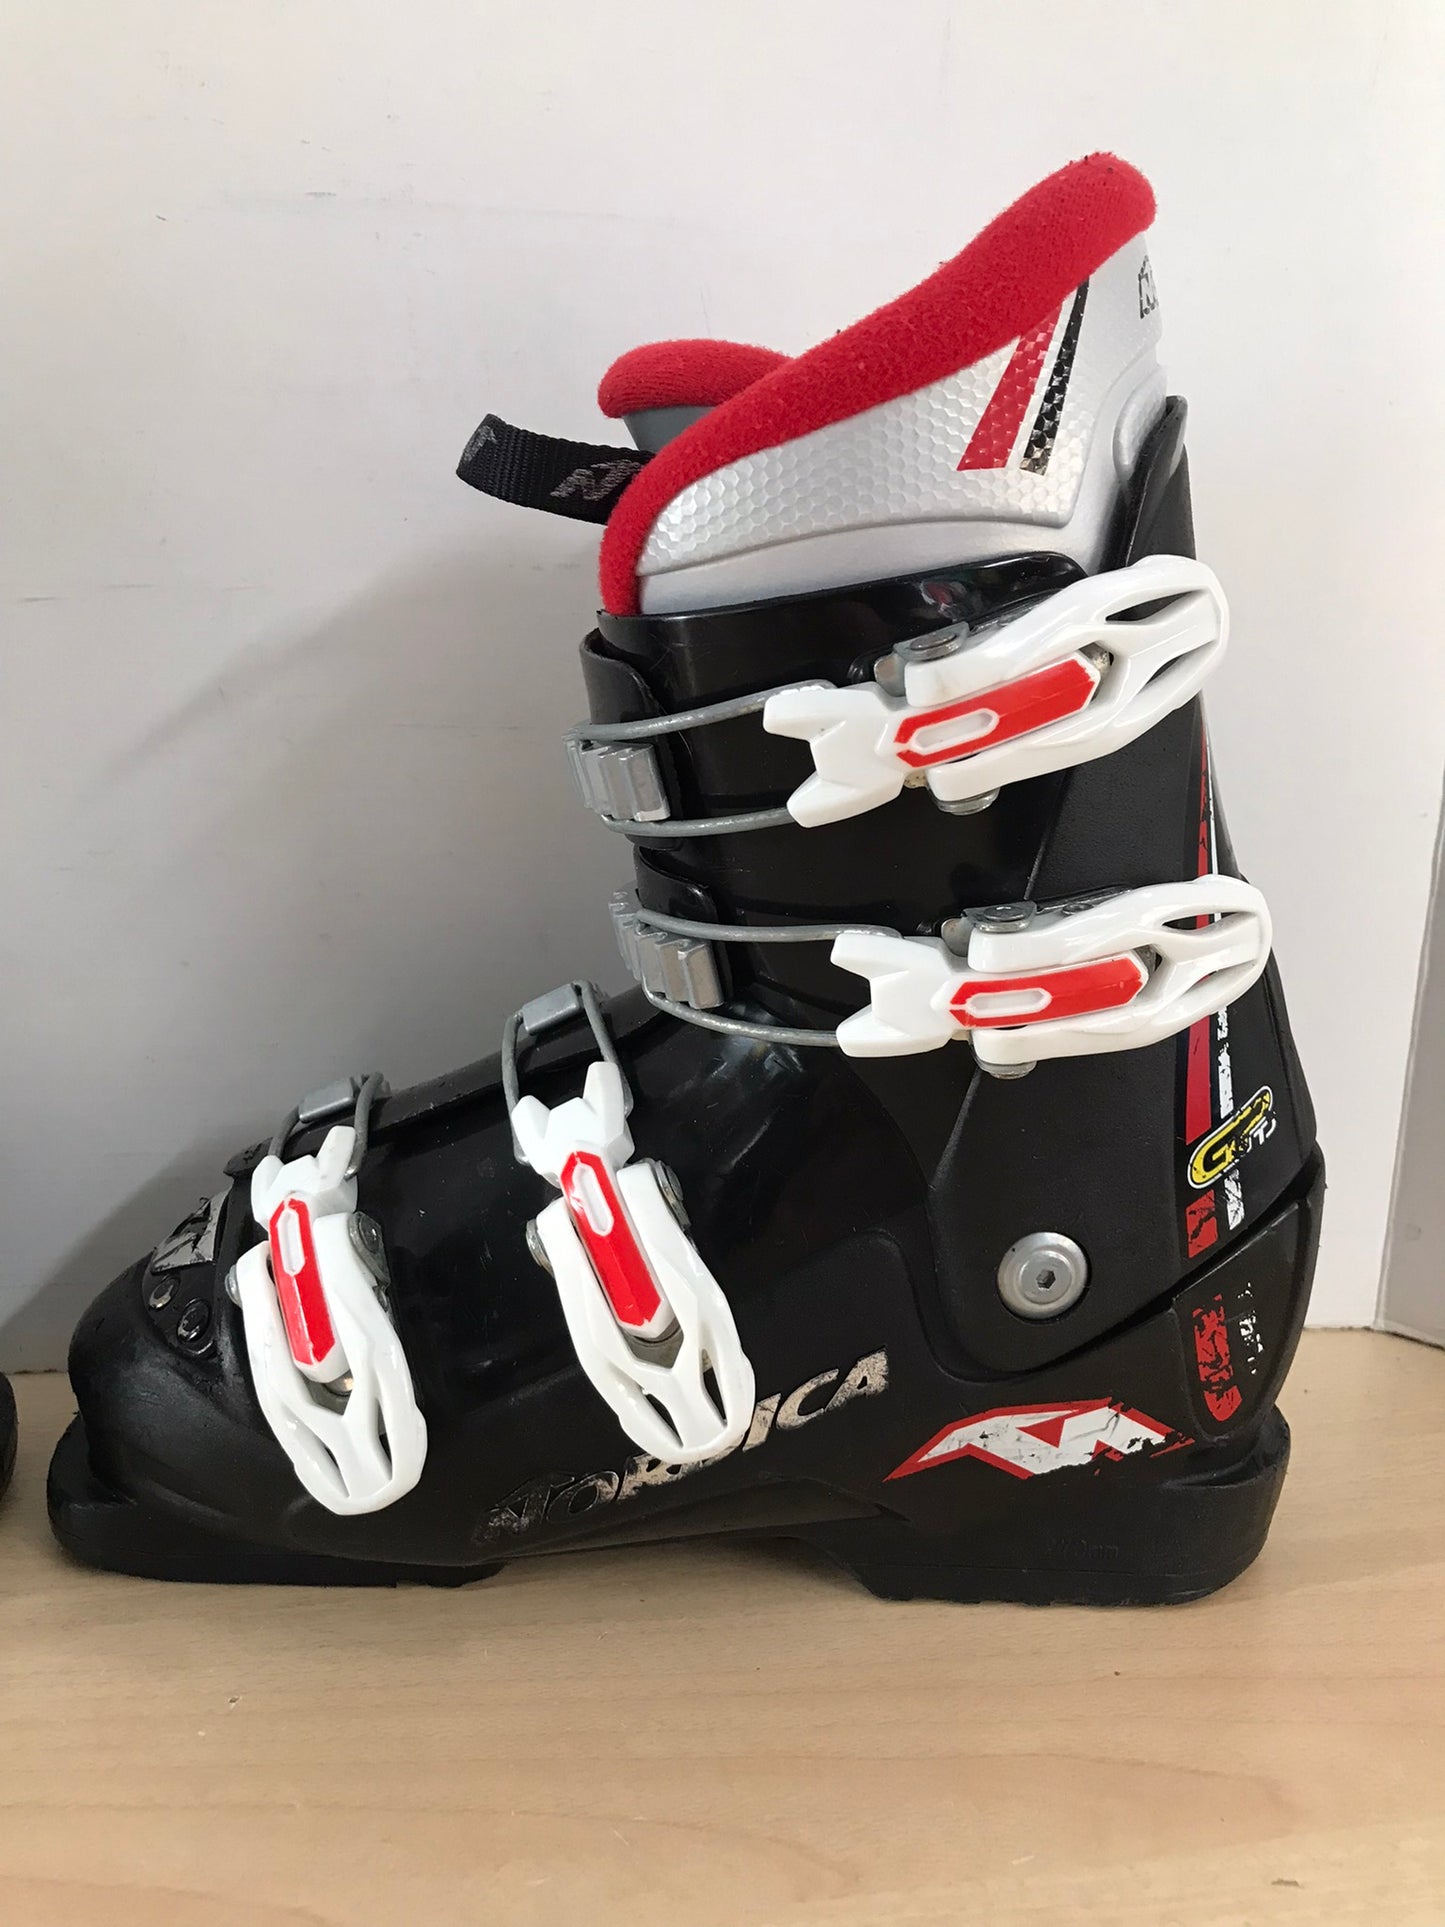 Ski Boots Mondo Size 23.0 Child Size 5 Shoe Size 270 mm Nordica Black Red Minor Wear and Scratches